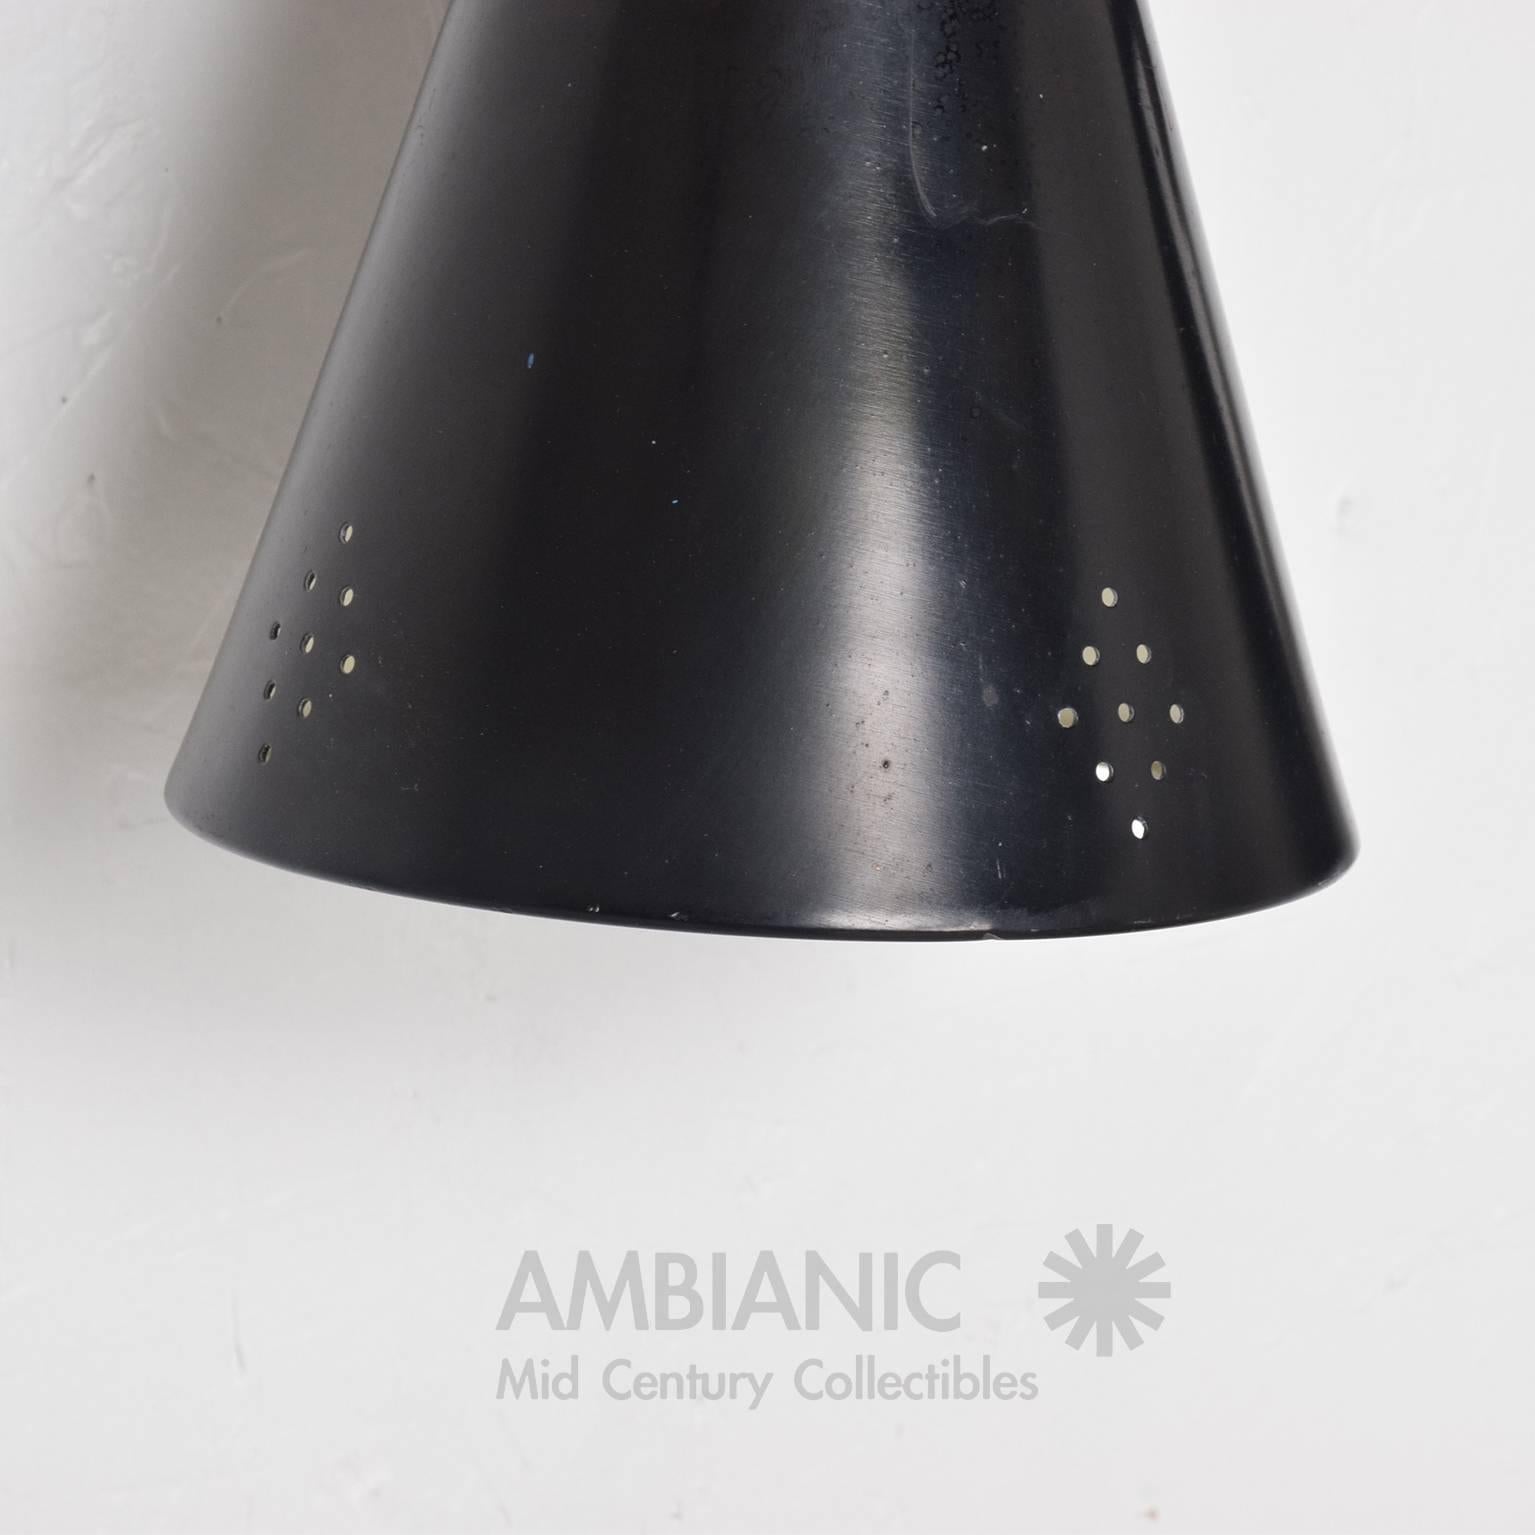 Mid-20th Century Pair of Mid-Century Modern Wall Sconces Made of Aluminum